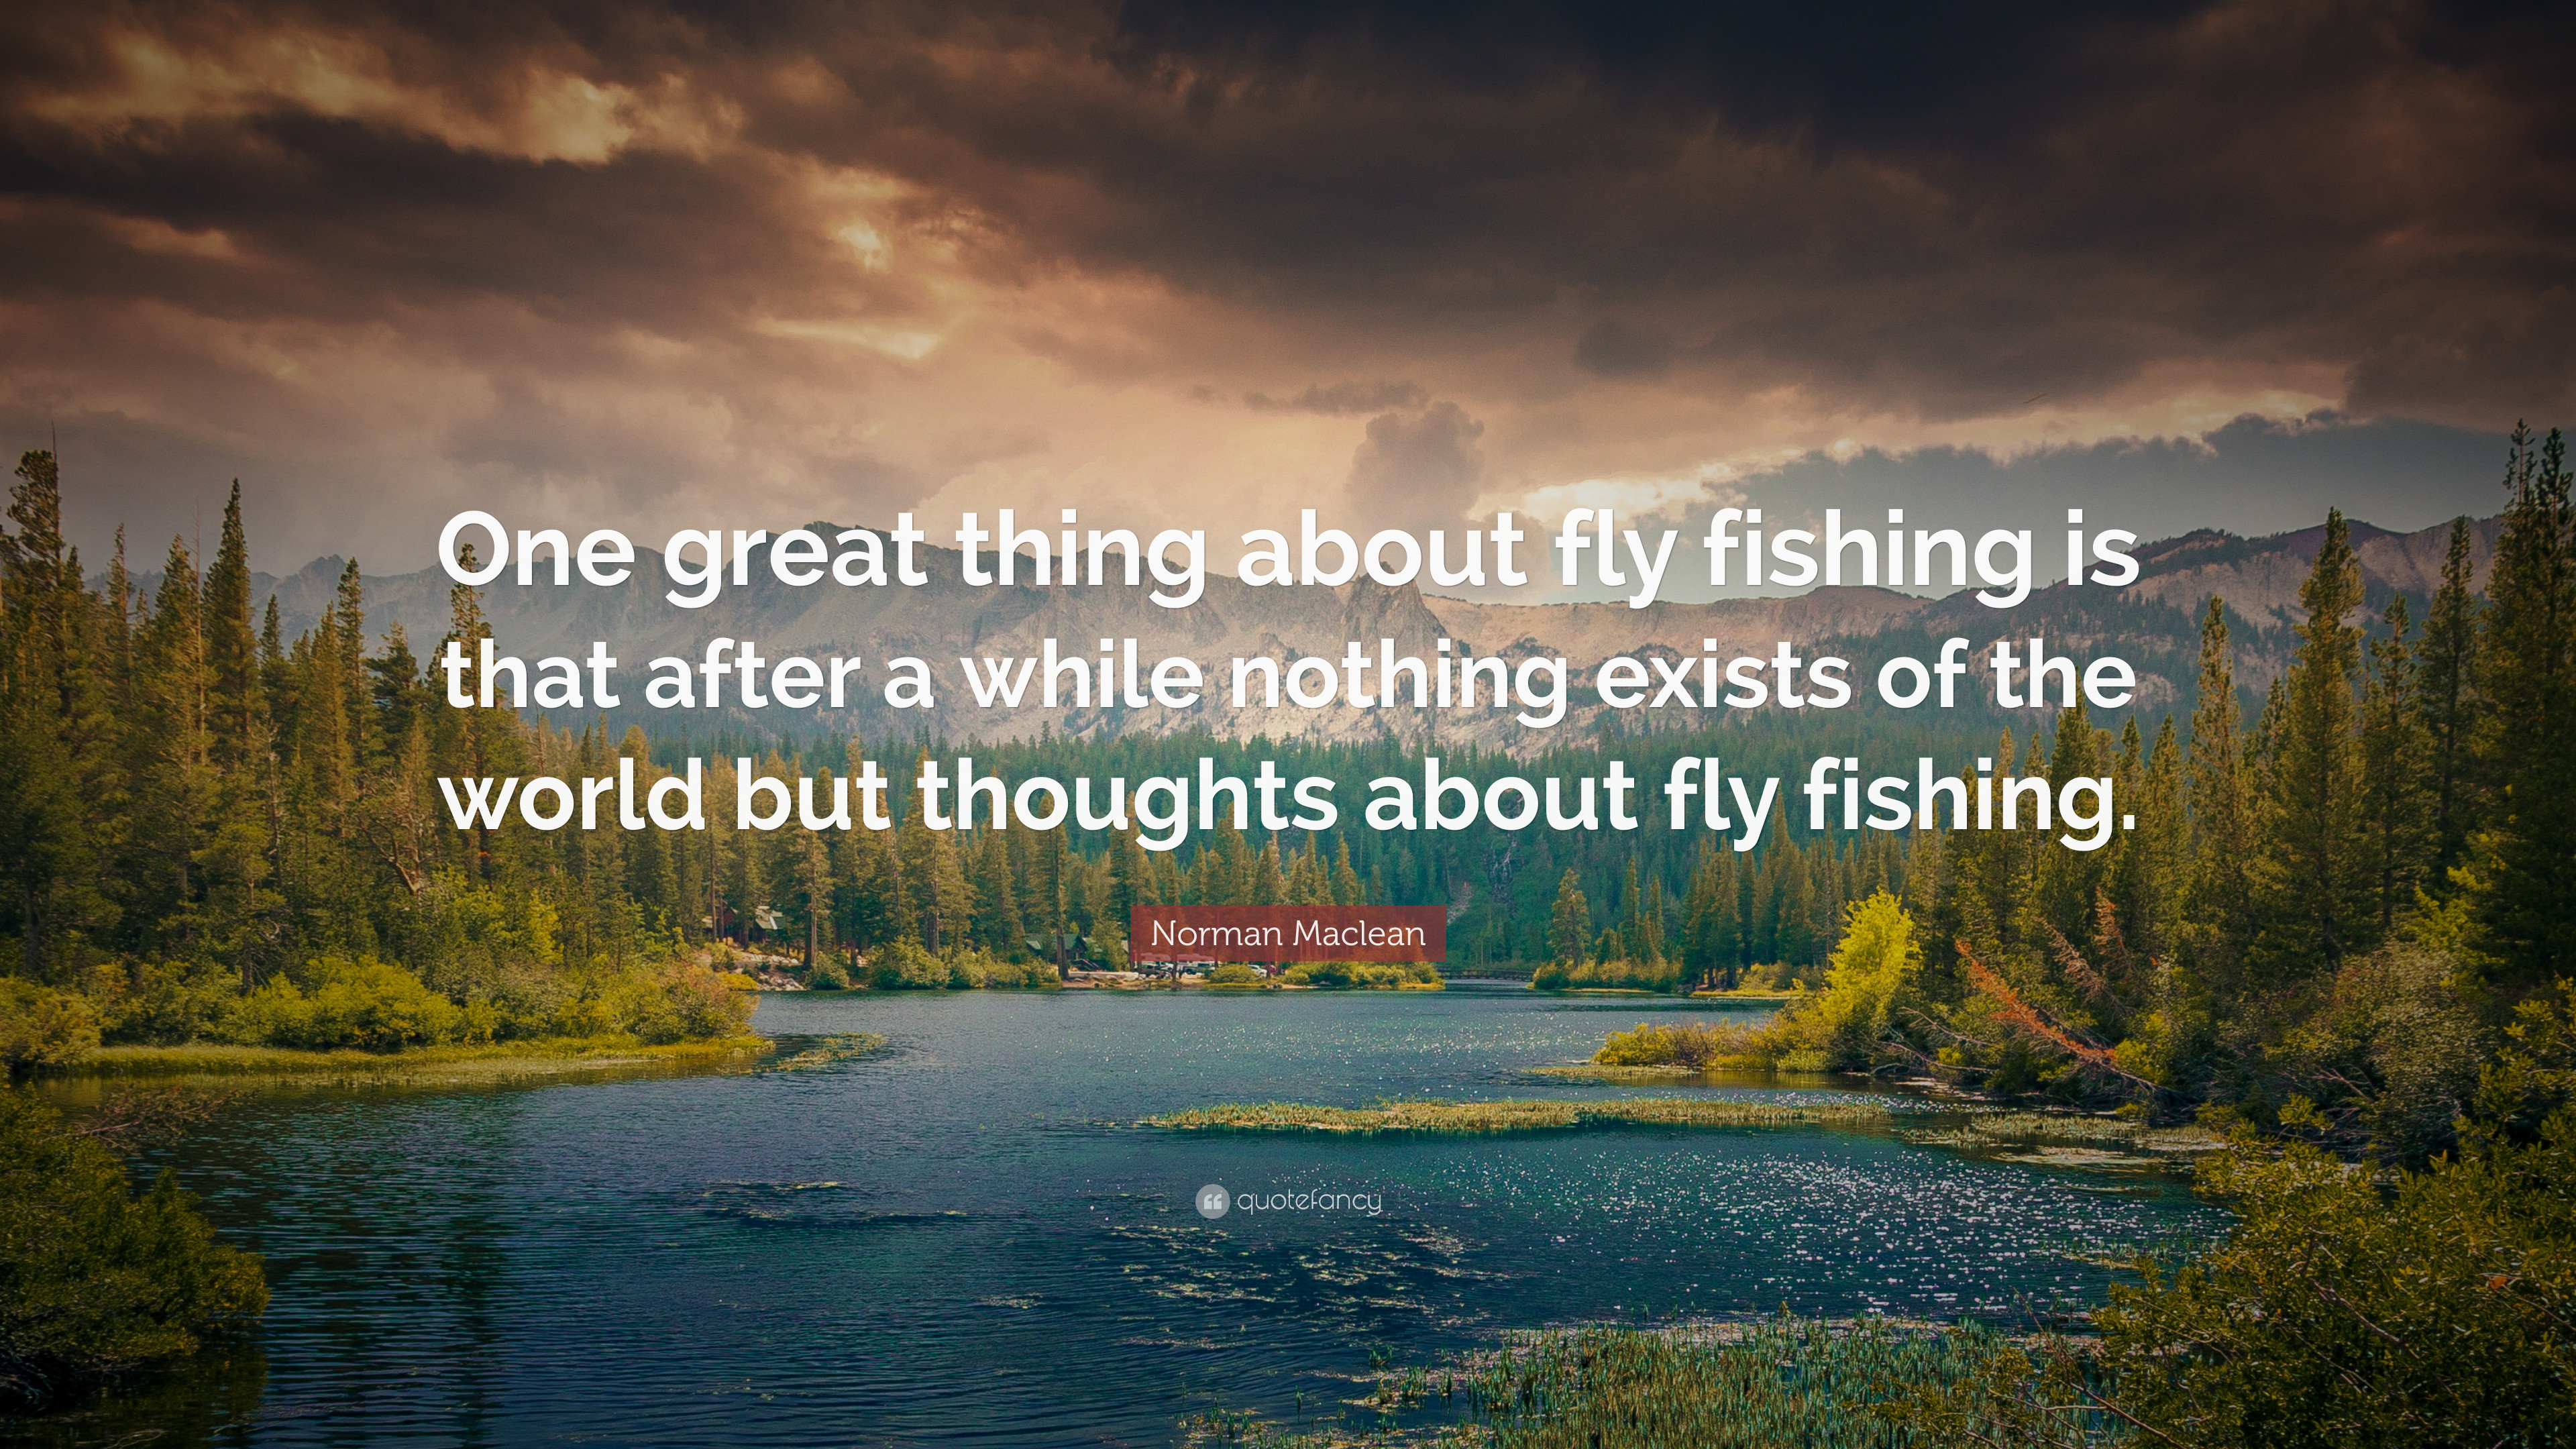 3840x2160 Norman Maclean Quote: “One great thing about fly fishing is that after a  while